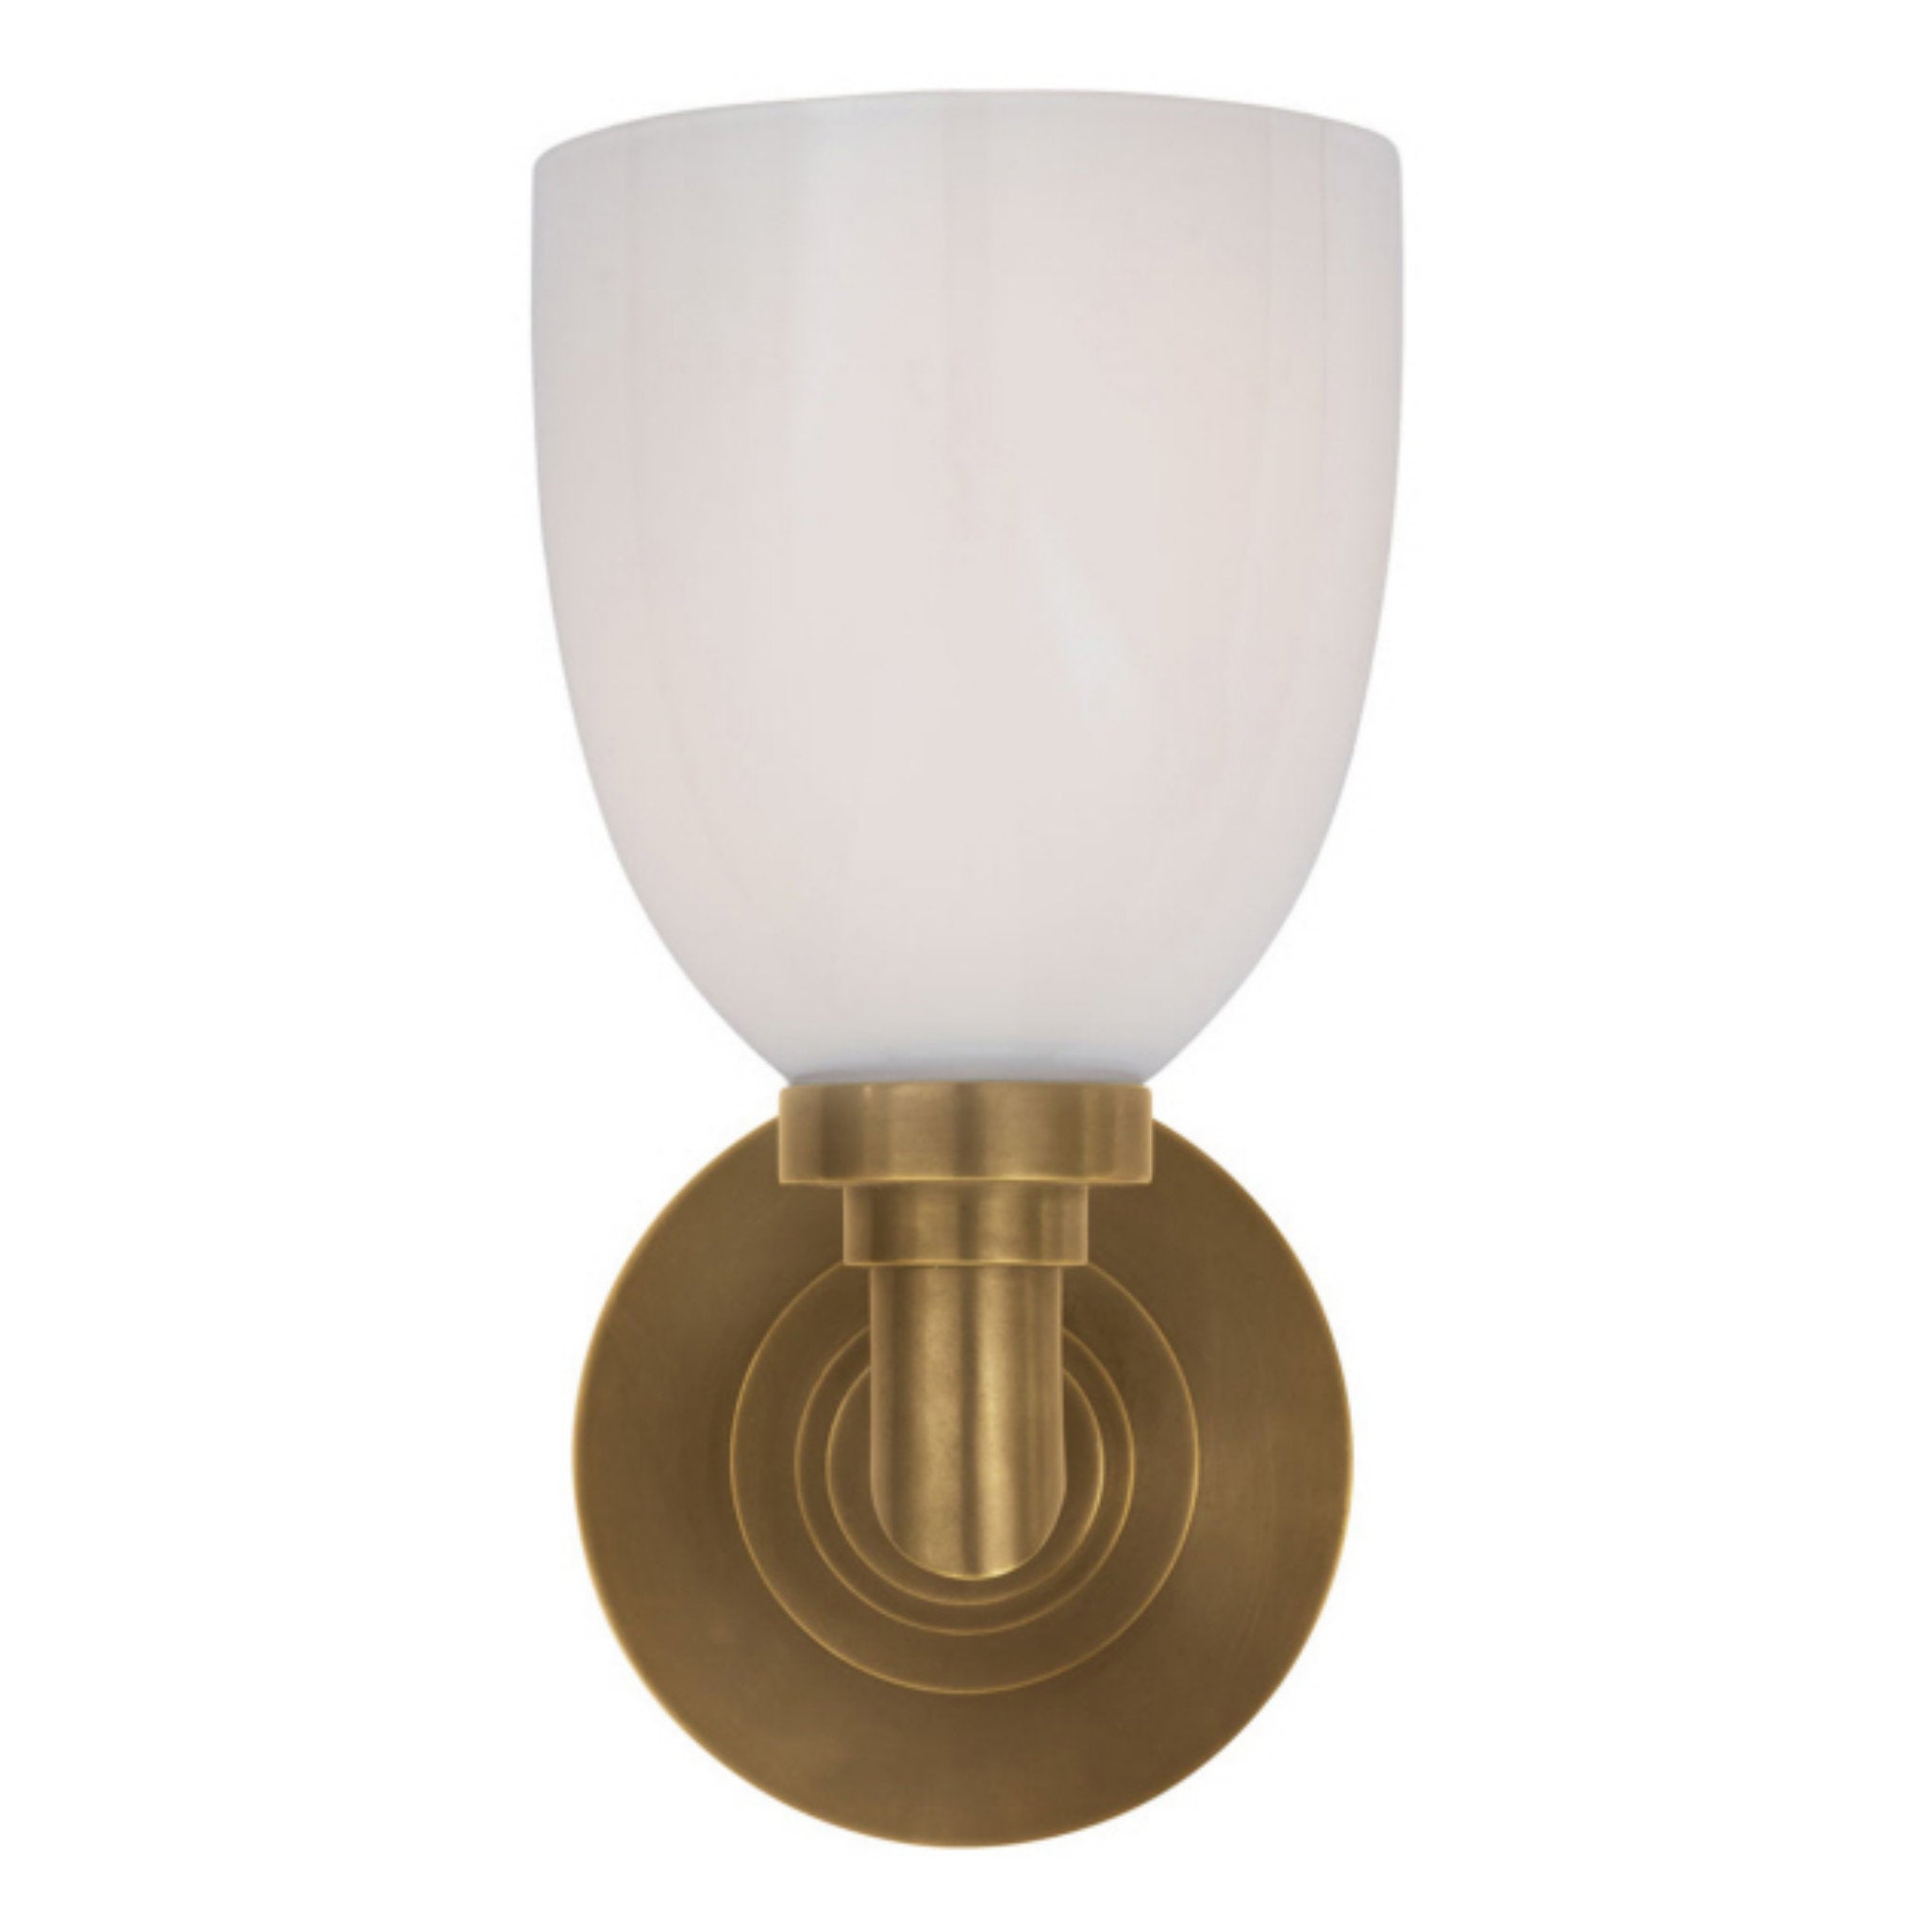 Chapman & Myers Wilton Single Bath Light in Hand-Rubbed Antique Brass with White Glass